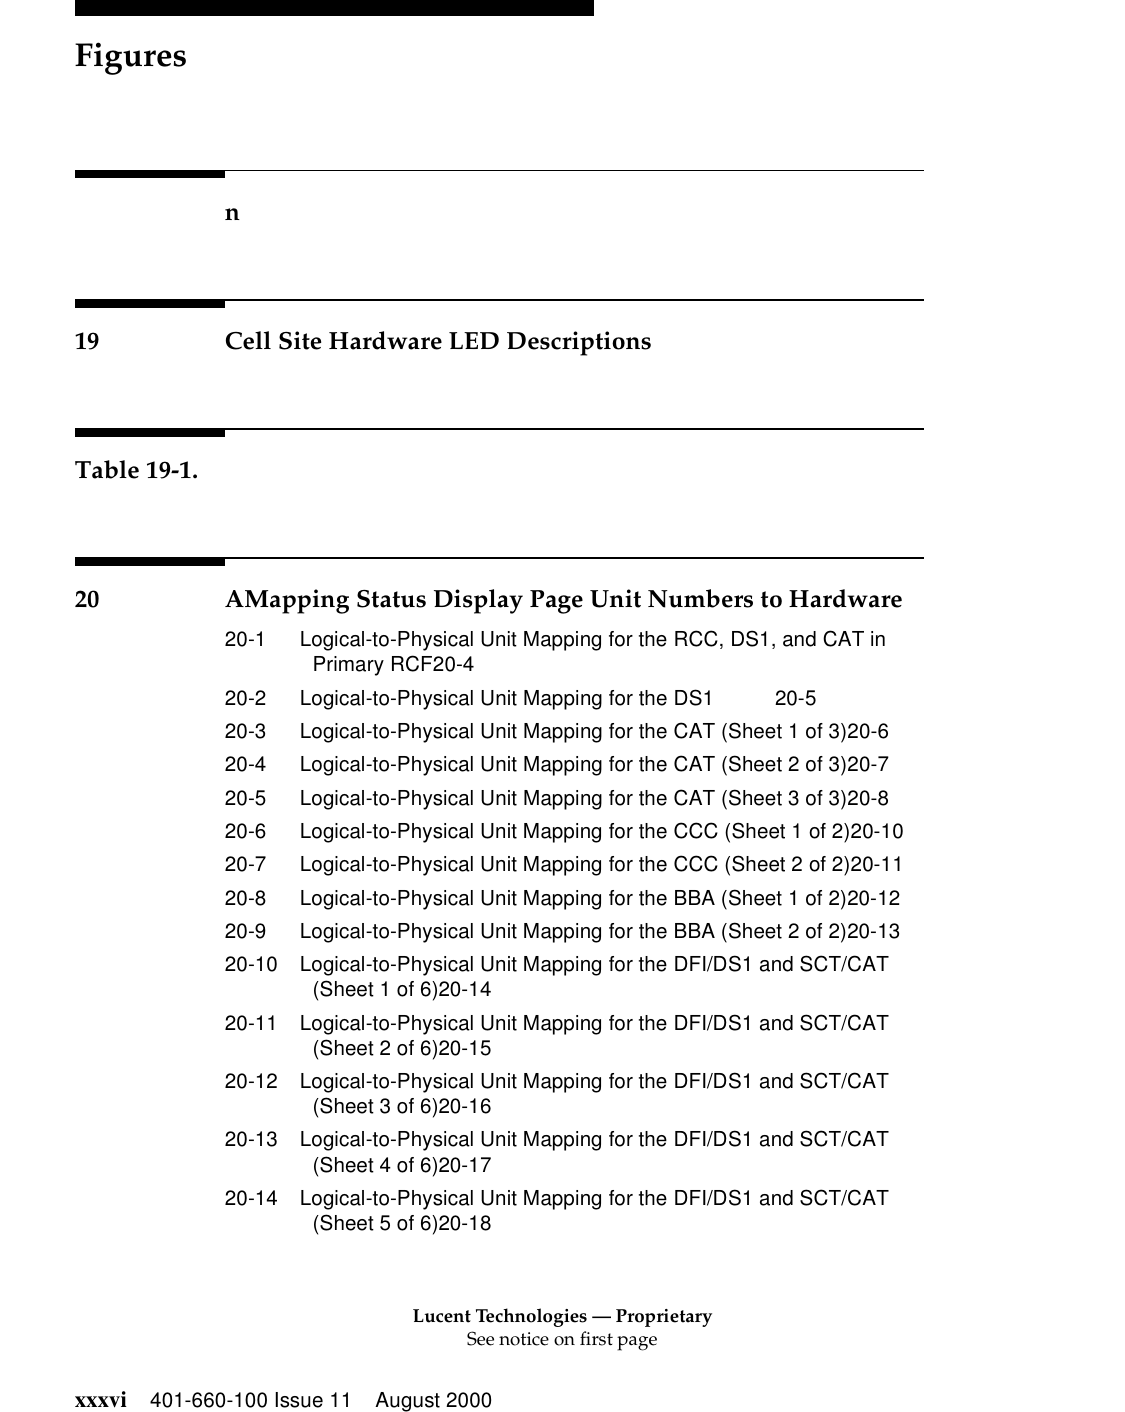 Lucent Technologies — ProprietarySee notice on first pageFiguresxxxvi 401-660-100 Issue 11 August 2000n19 Cell Site Hardware LED DescriptionsTable 19-1.20 AMapping Status Display Page Unit Numbers to Hardware20-1 Logical-to-Physical Unit Mapping for the RCC, DS1, and CAT inPrimary RCF20-420-2 Logical-to-Physical Unit Mapping for the DS1 20-520-3 Logical-to-Physical Unit Mapping for the CAT (Sheet 1 of 3)20-620-4 Logical-to-Physical Unit Mapping for the CAT (Sheet 2 of 3)20-720-5 Logical-to-Physical Unit Mapping for the CAT (Sheet 3 of 3)20-820-6 Logical-to-Physical Unit Mapping for the CCC (Sheet 1 of 2)20-1020-7 Logical-to-Physical Unit Mapping for the CCC (Sheet 2 of 2)20-1120-8 Logical-to-Physical Unit Mapping for the BBA (Sheet 1 of 2)20-1220-9 Logical-to-Physical Unit Mapping for the BBA (Sheet 2 of 2)20-1320-10 Logical-to-Physical Unit Mapping for the DFI/DS1 and SCT/CAT(Sheet 1 of 6)20-1420-11 Logical-to-Physical Unit Mapping for the DFI/DS1 and SCT/CAT(Sheet 2 of 6)20-1520-12 Logical-to-Physical Unit Mapping for the DFI/DS1 and SCT/CAT(Sheet 3 of 6)20-1620-13 Logical-to-Physical Unit Mapping for the DFI/DS1 and SCT/CAT(Sheet 4 of 6)20-1720-14 Logical-to-Physical Unit Mapping for the DFI/DS1 and SCT/CAT(Sheet 5 of 6)20-18